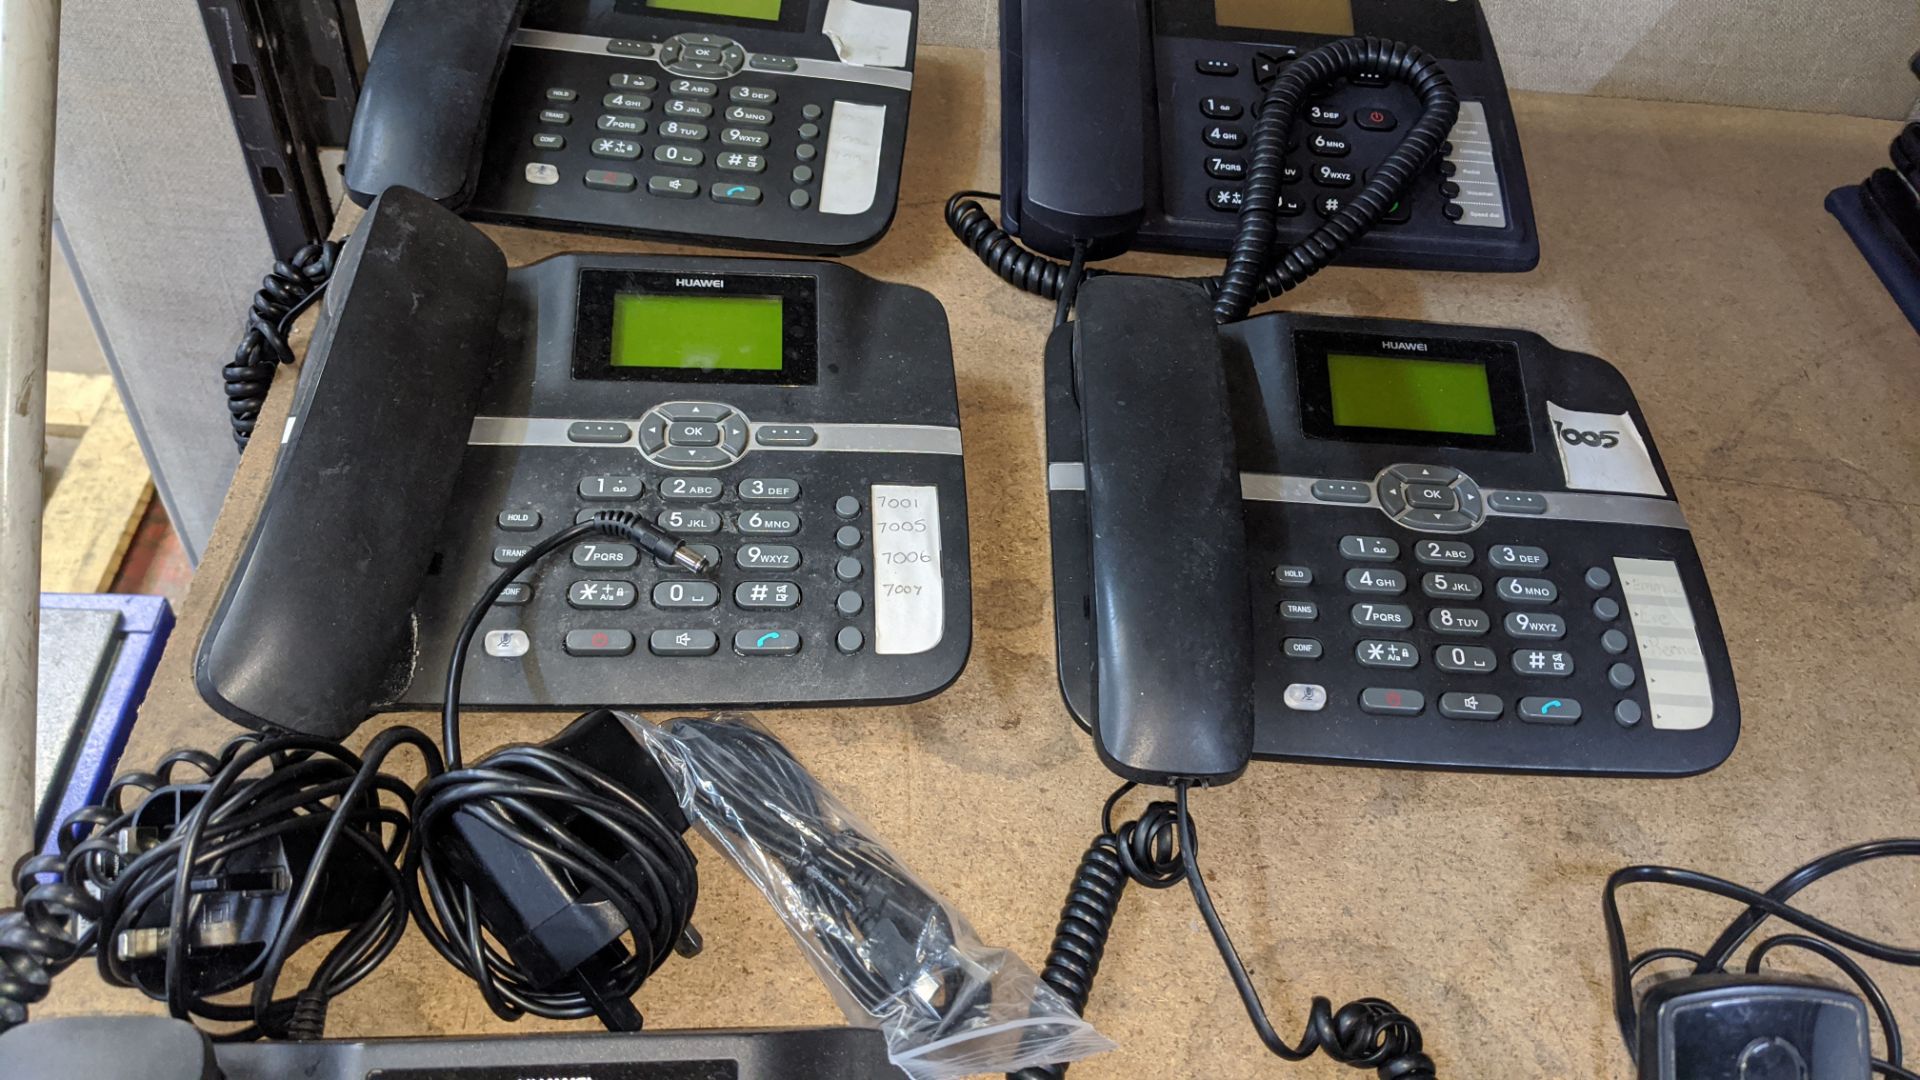 5 off Huawei telephone handsets model F610 plus DECT telephone handset & charging station. NB this - Image 4 of 5